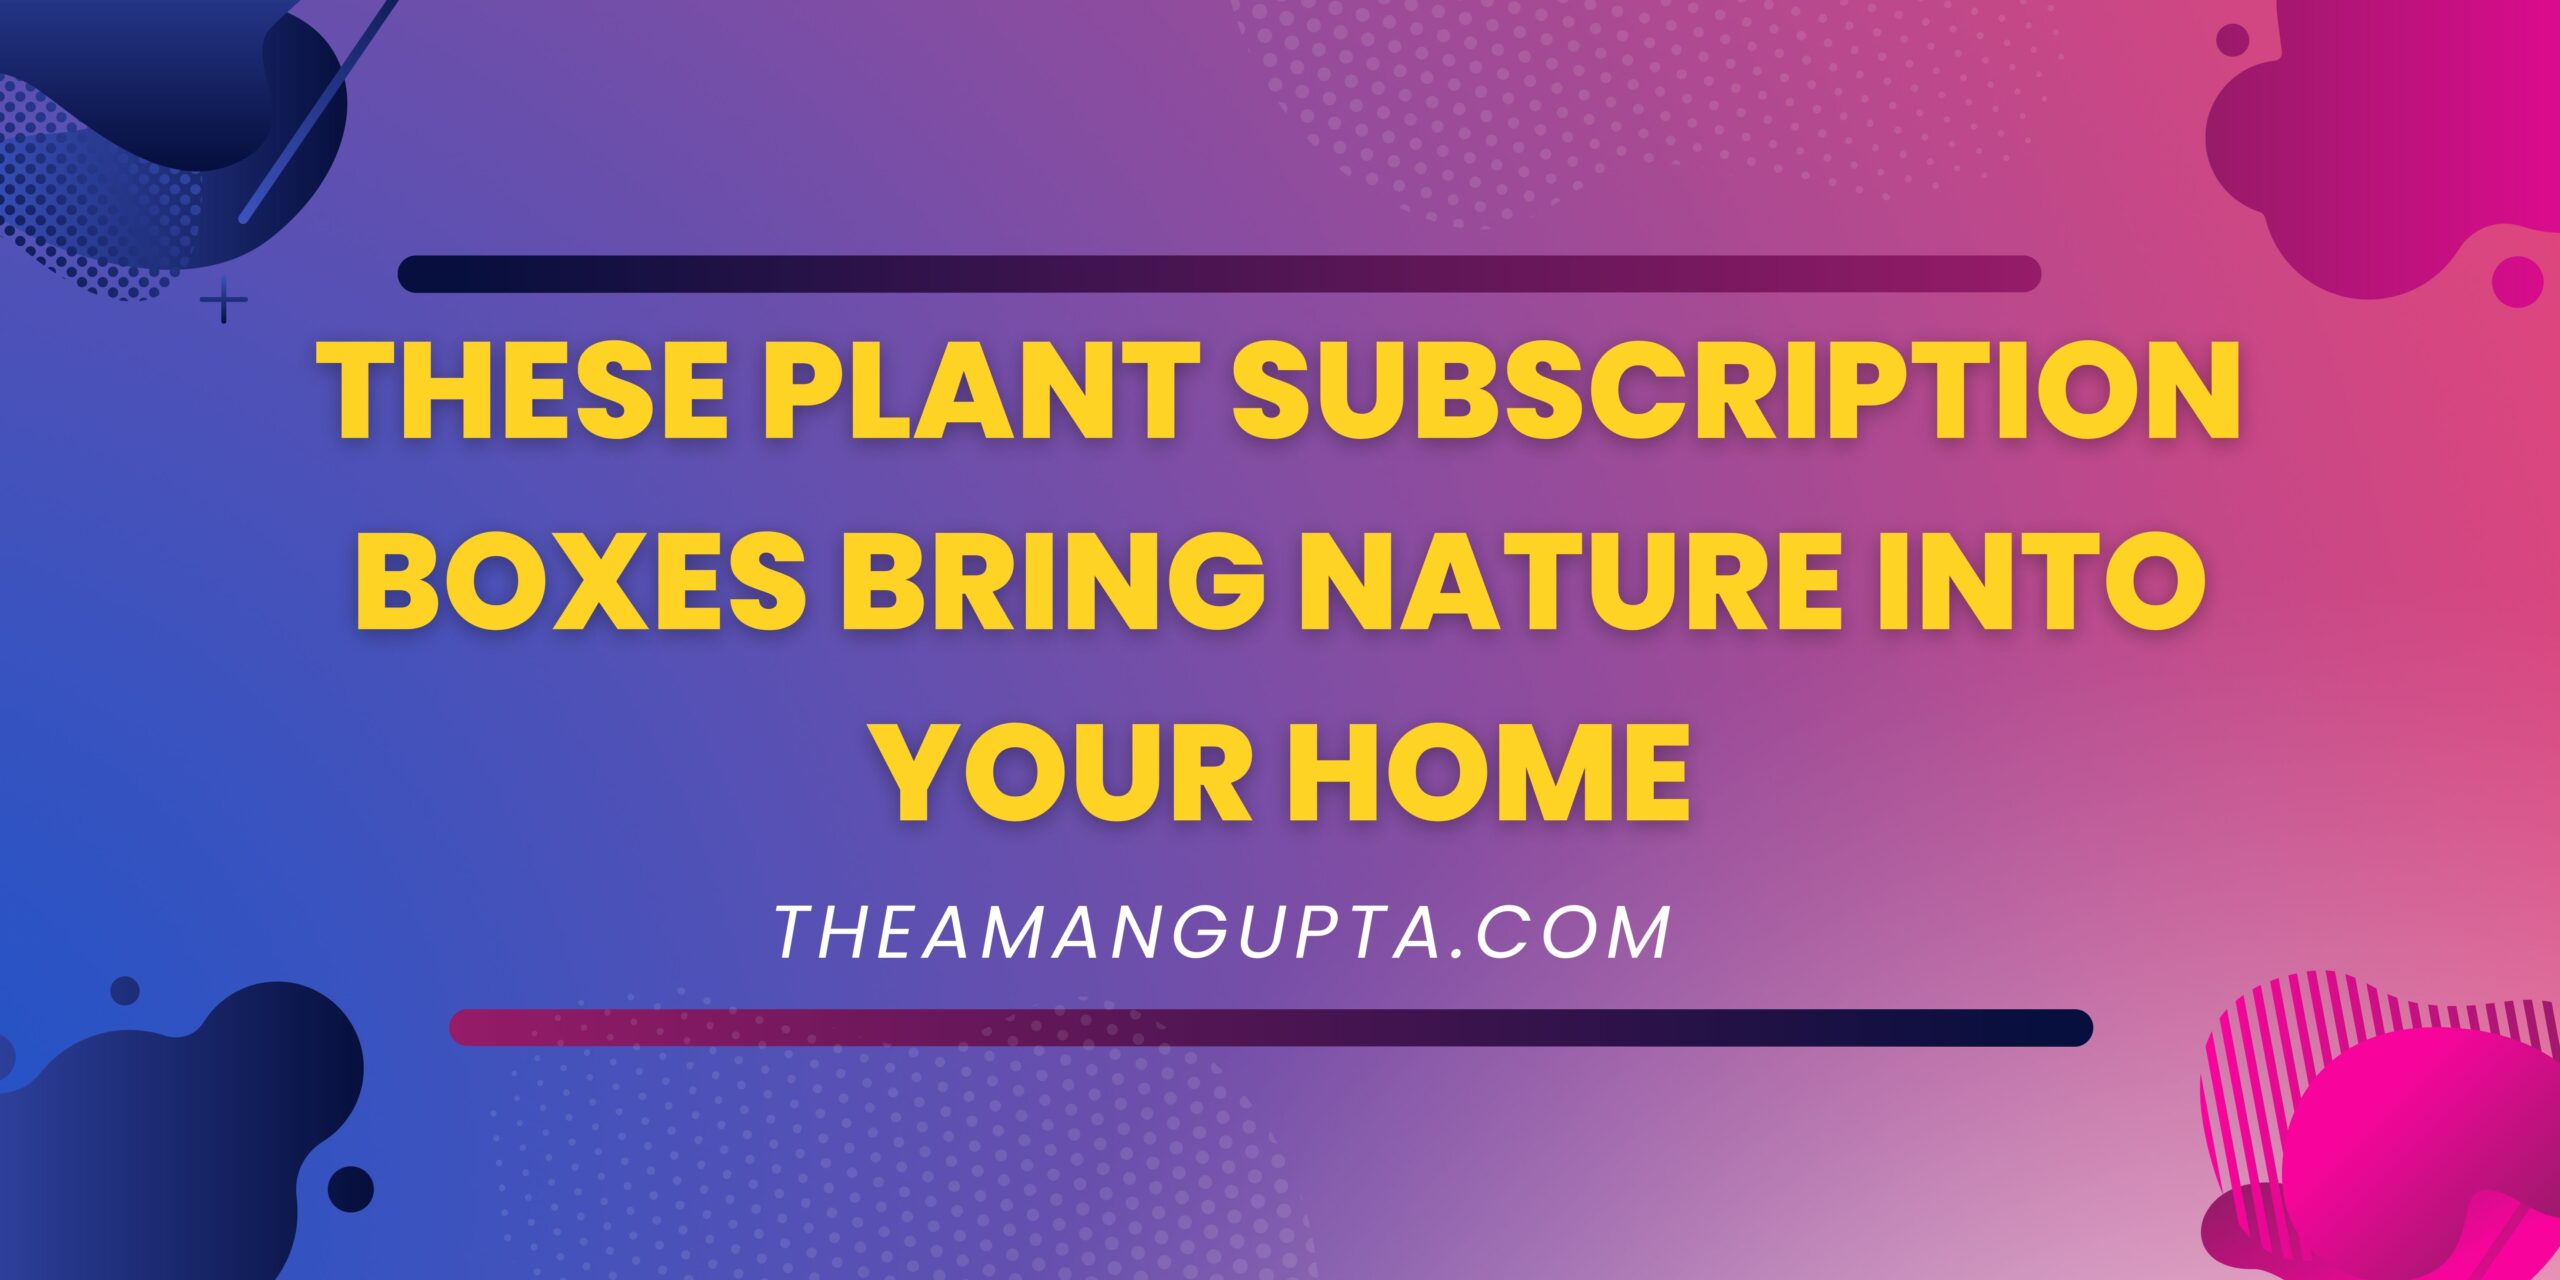 These Plant Subscription Boxes Bring Nature into Your Home